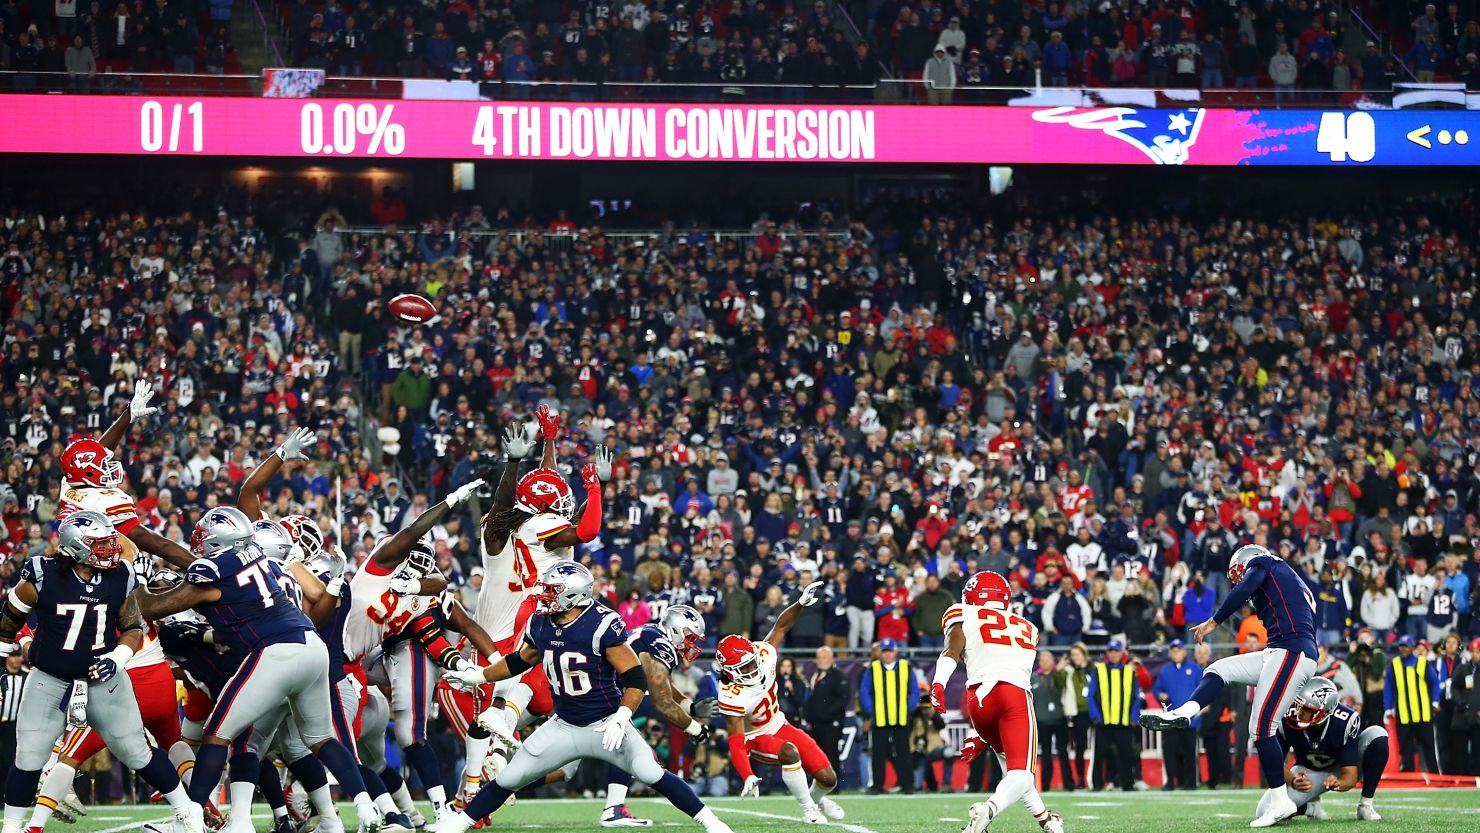 FOXBOROUGH, MA - OCTOBER 14:  Stephen Gostkowski #3 of the New England Patriots kicks the game-ending field goal to give the New England Patriots the win over the Kansas City Chiefs at Gillette Stadium on October 14, 2018 in Foxborough, Massachusetts.  (Photo by Adam Glanzman/Getty Images)